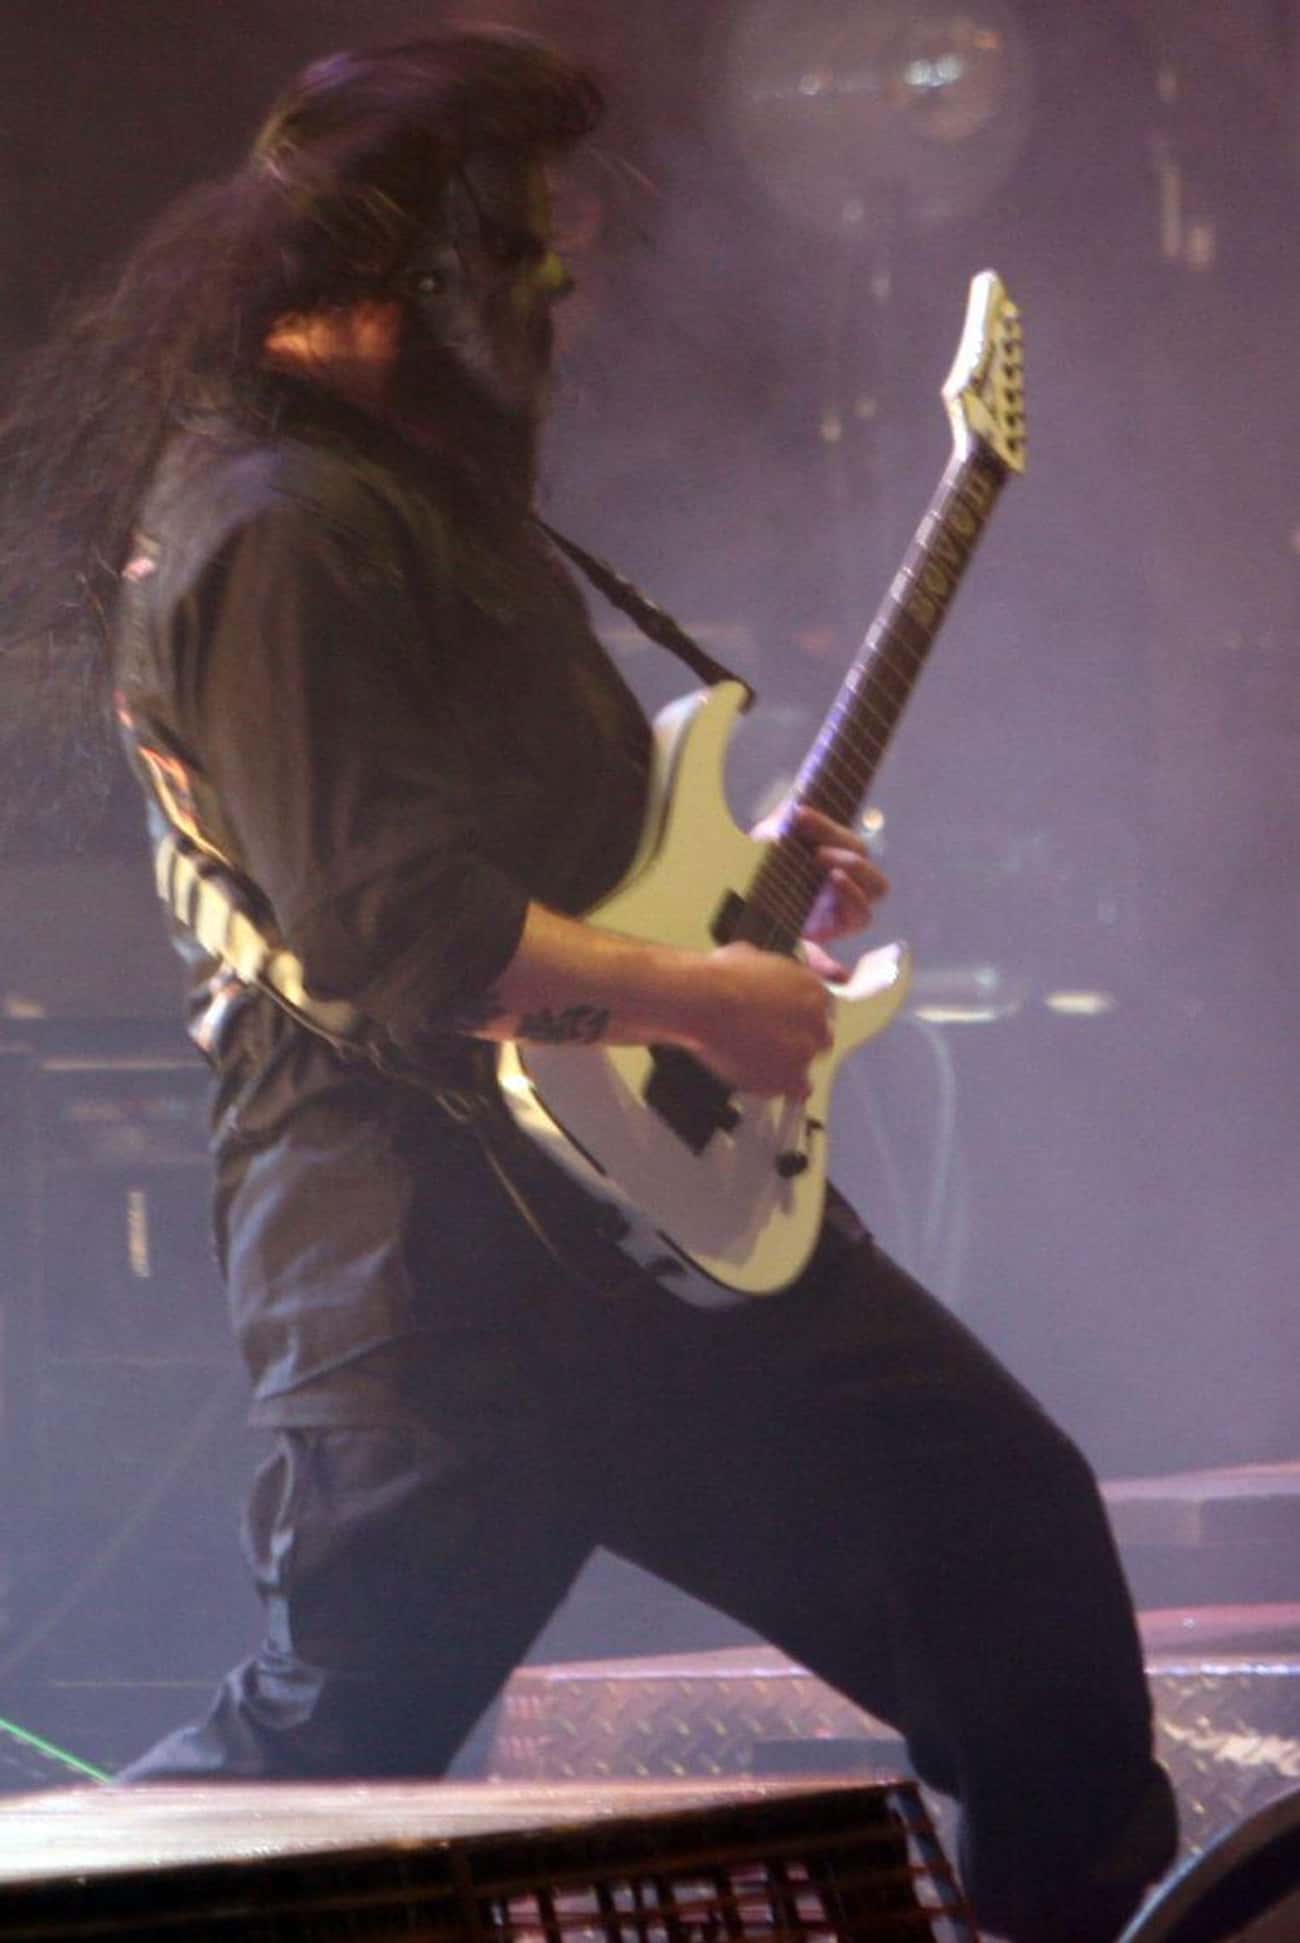 Guitarist Mick Thomson Had A Public, Drunken Knife Fight With His Brother